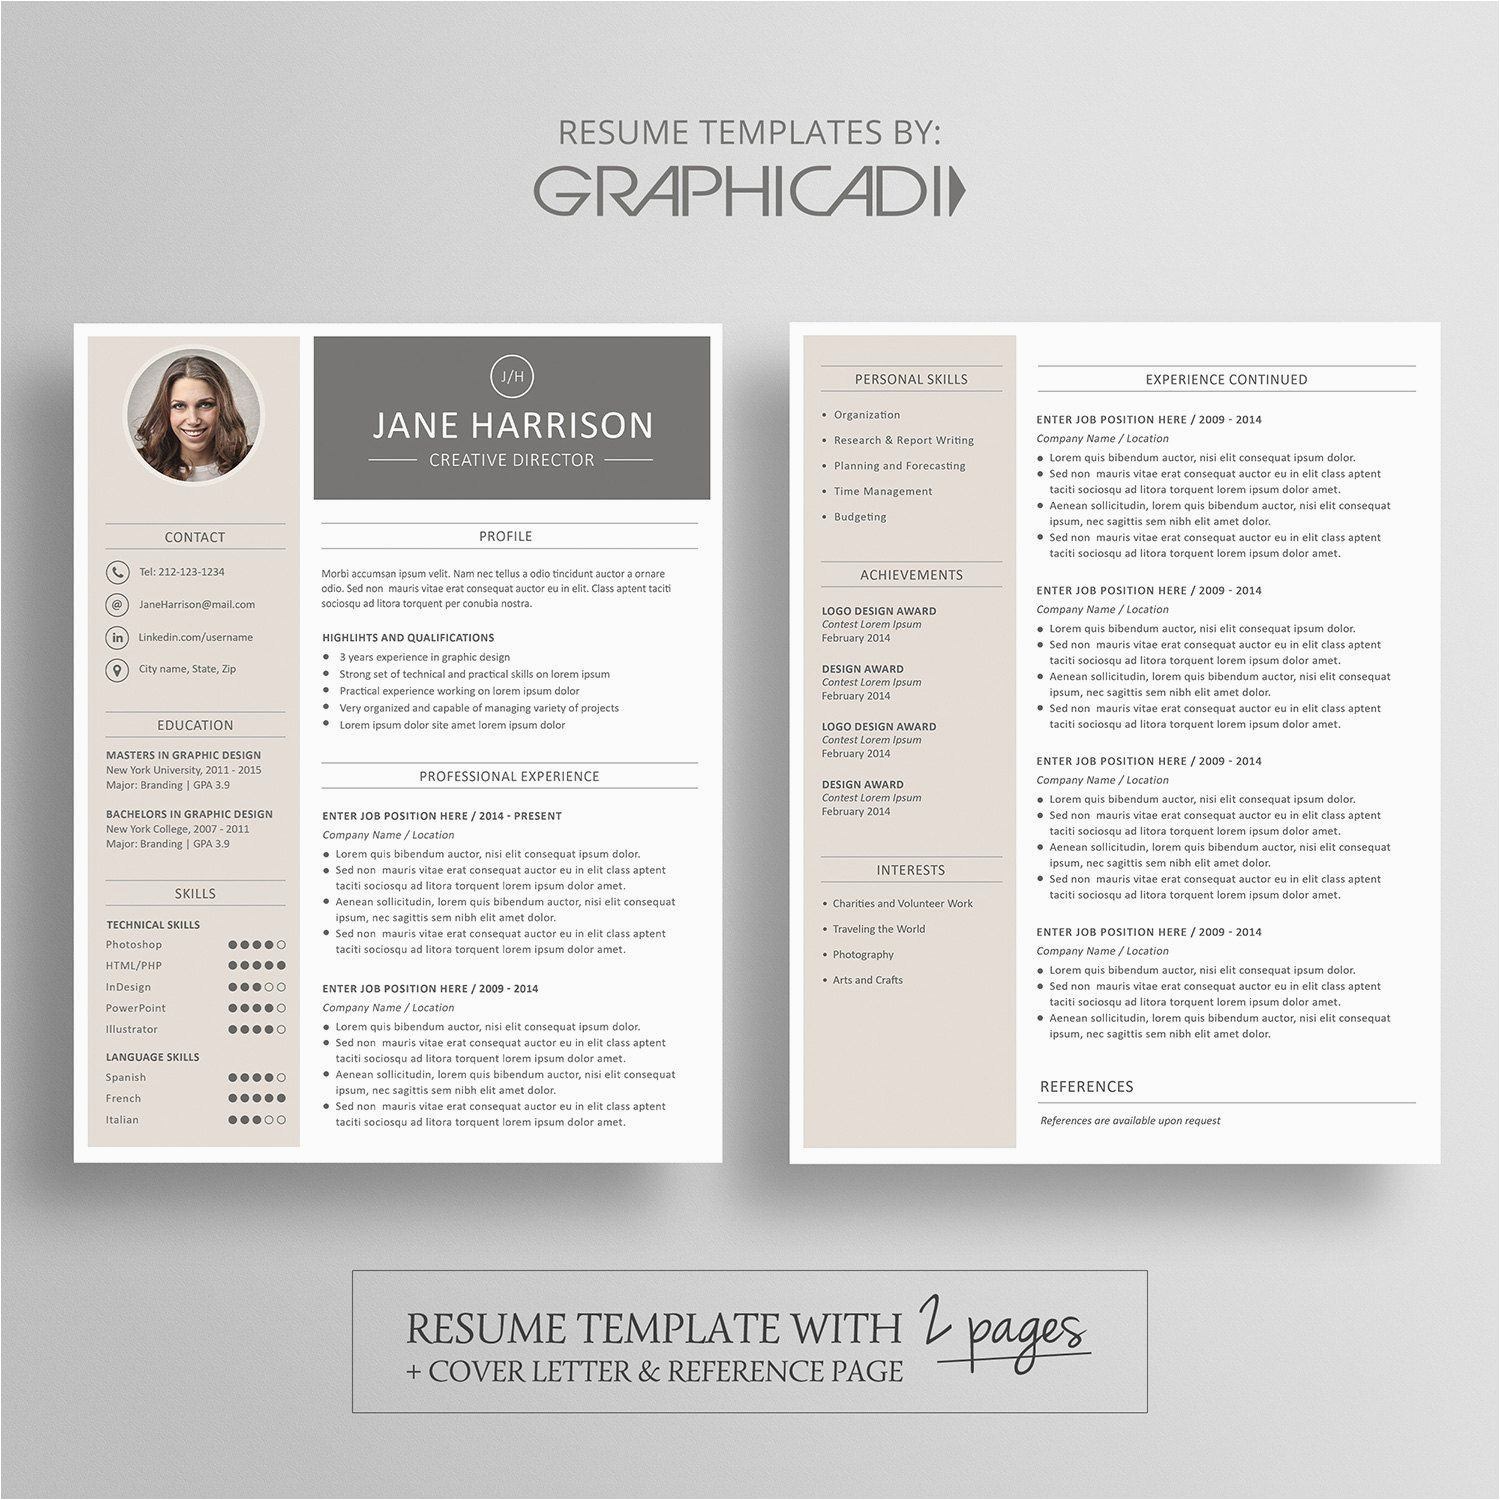 1 page resume template free word how you can attend 1 page resume template free word with minimal bud